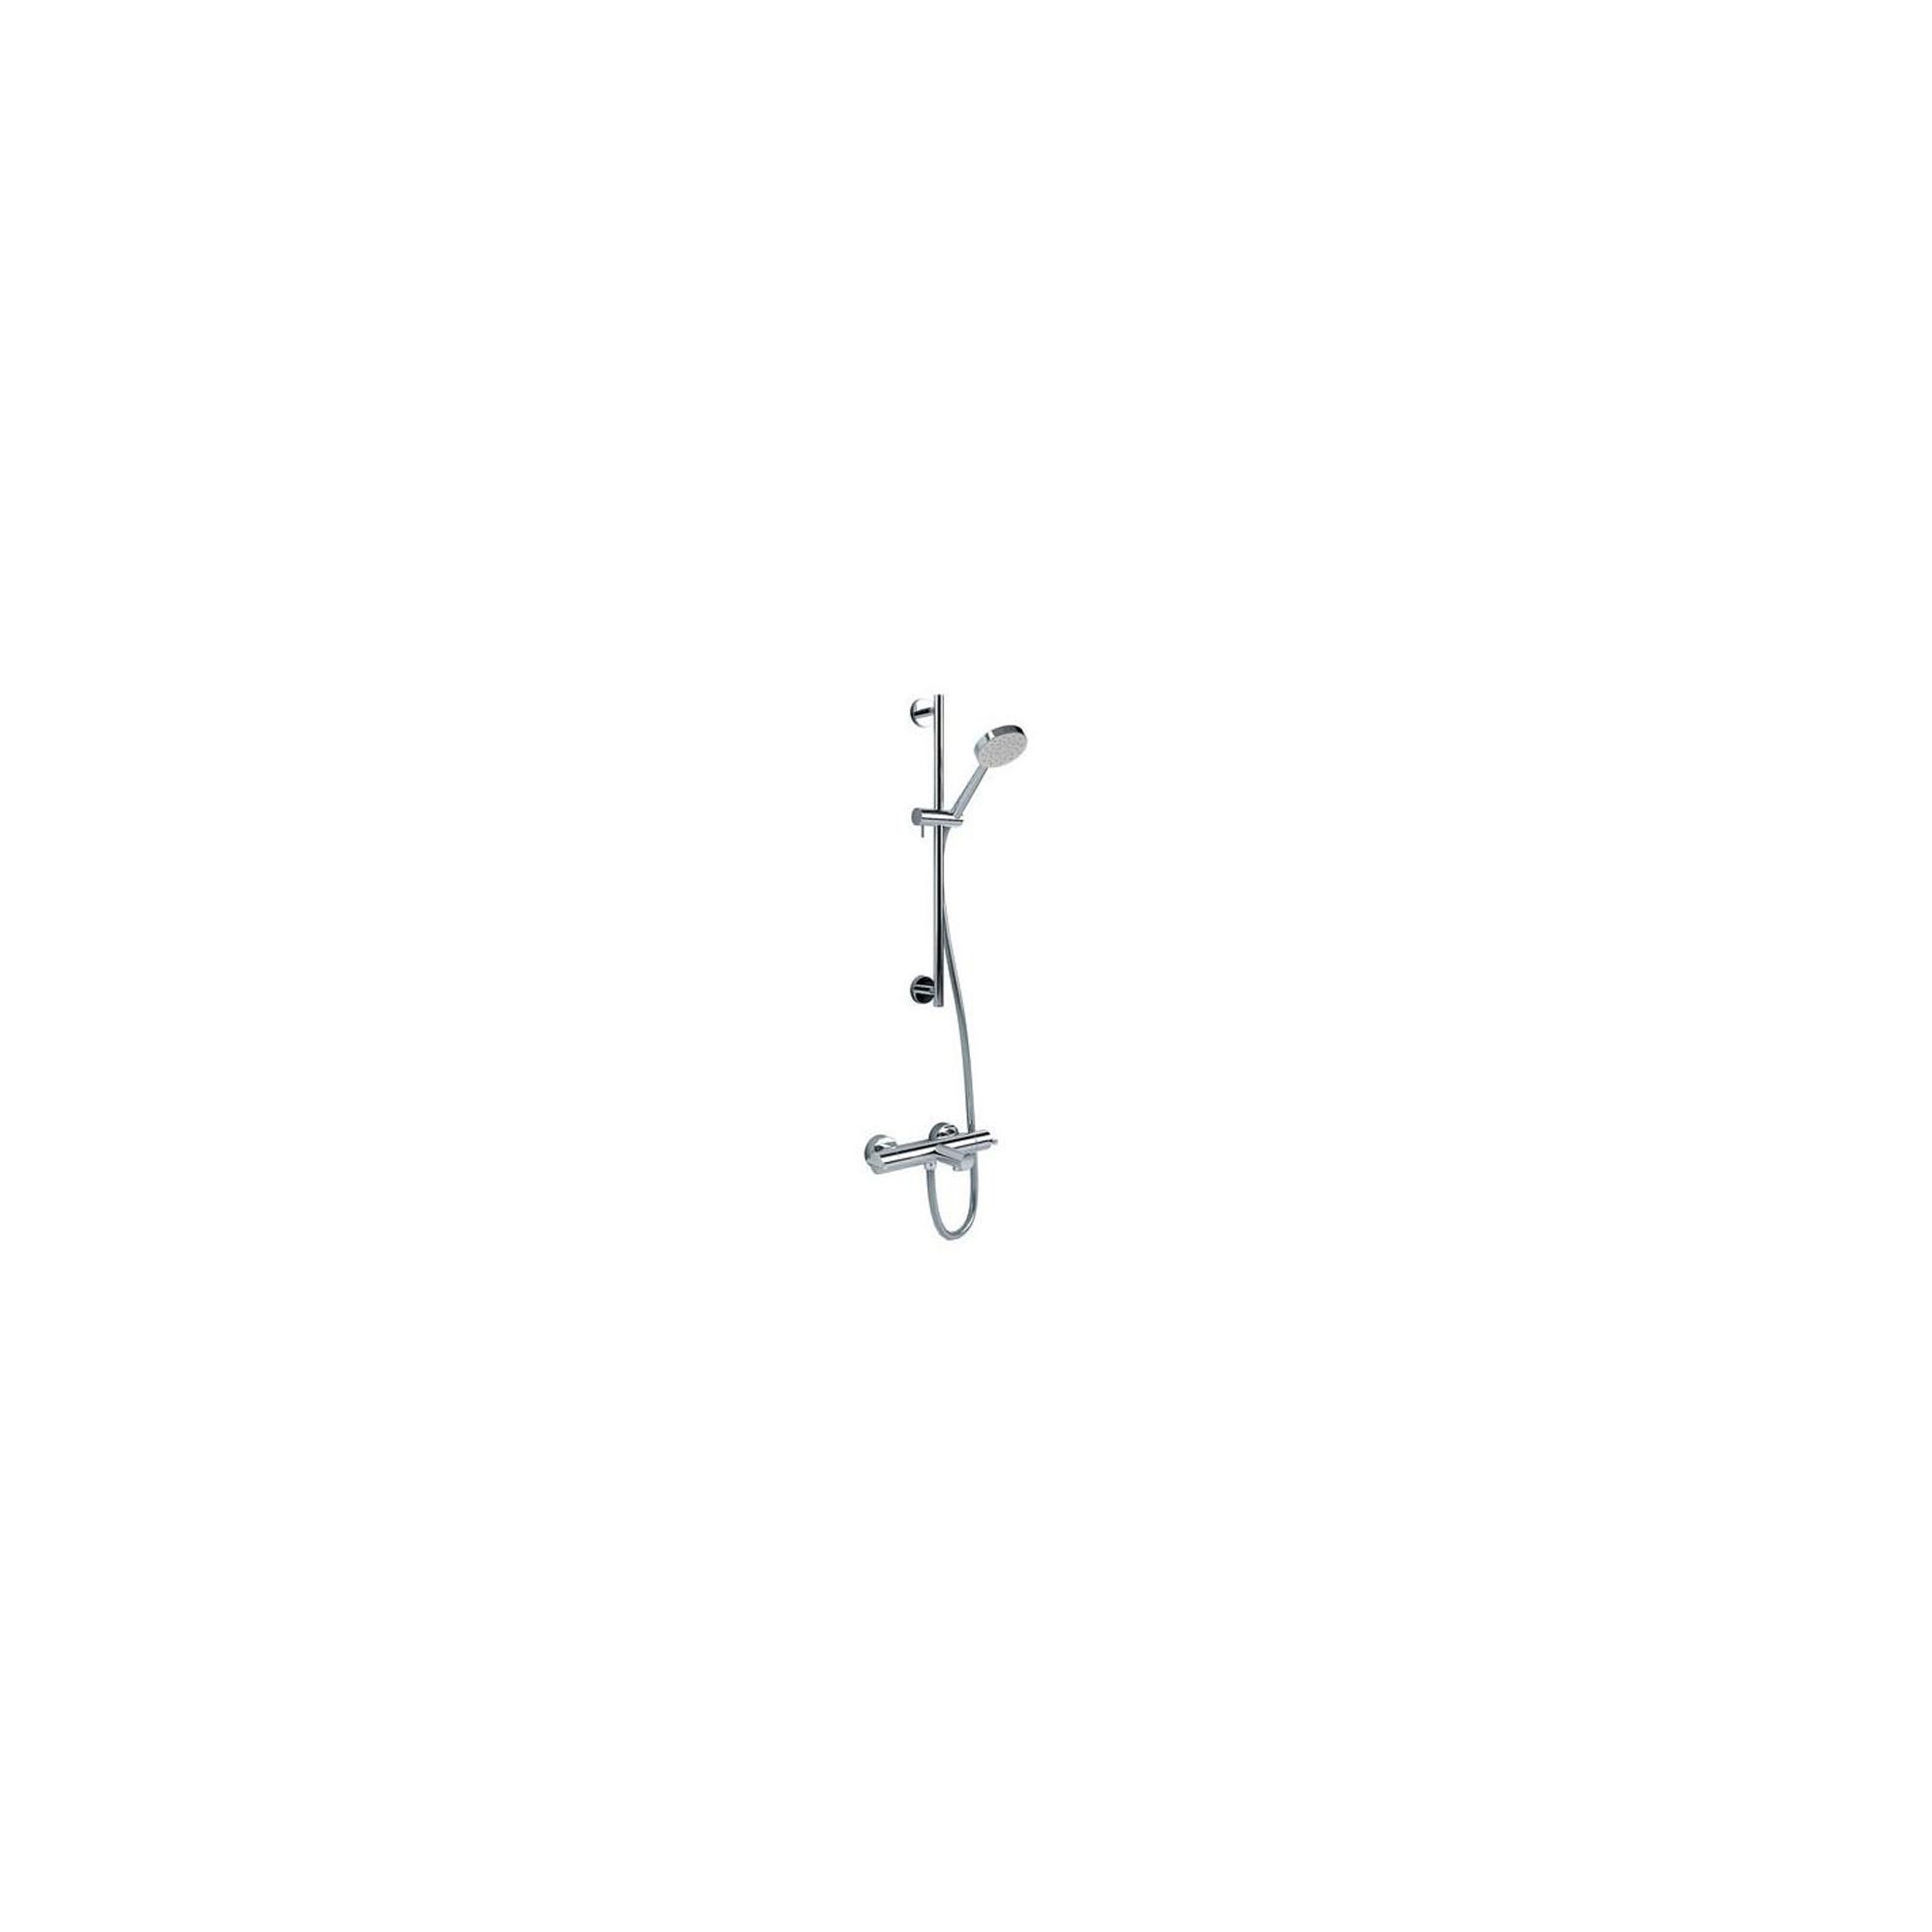 Inta City Thermostatic Bath Shower Mixer Tap with Shower Kit Chrome at Tescos Direct